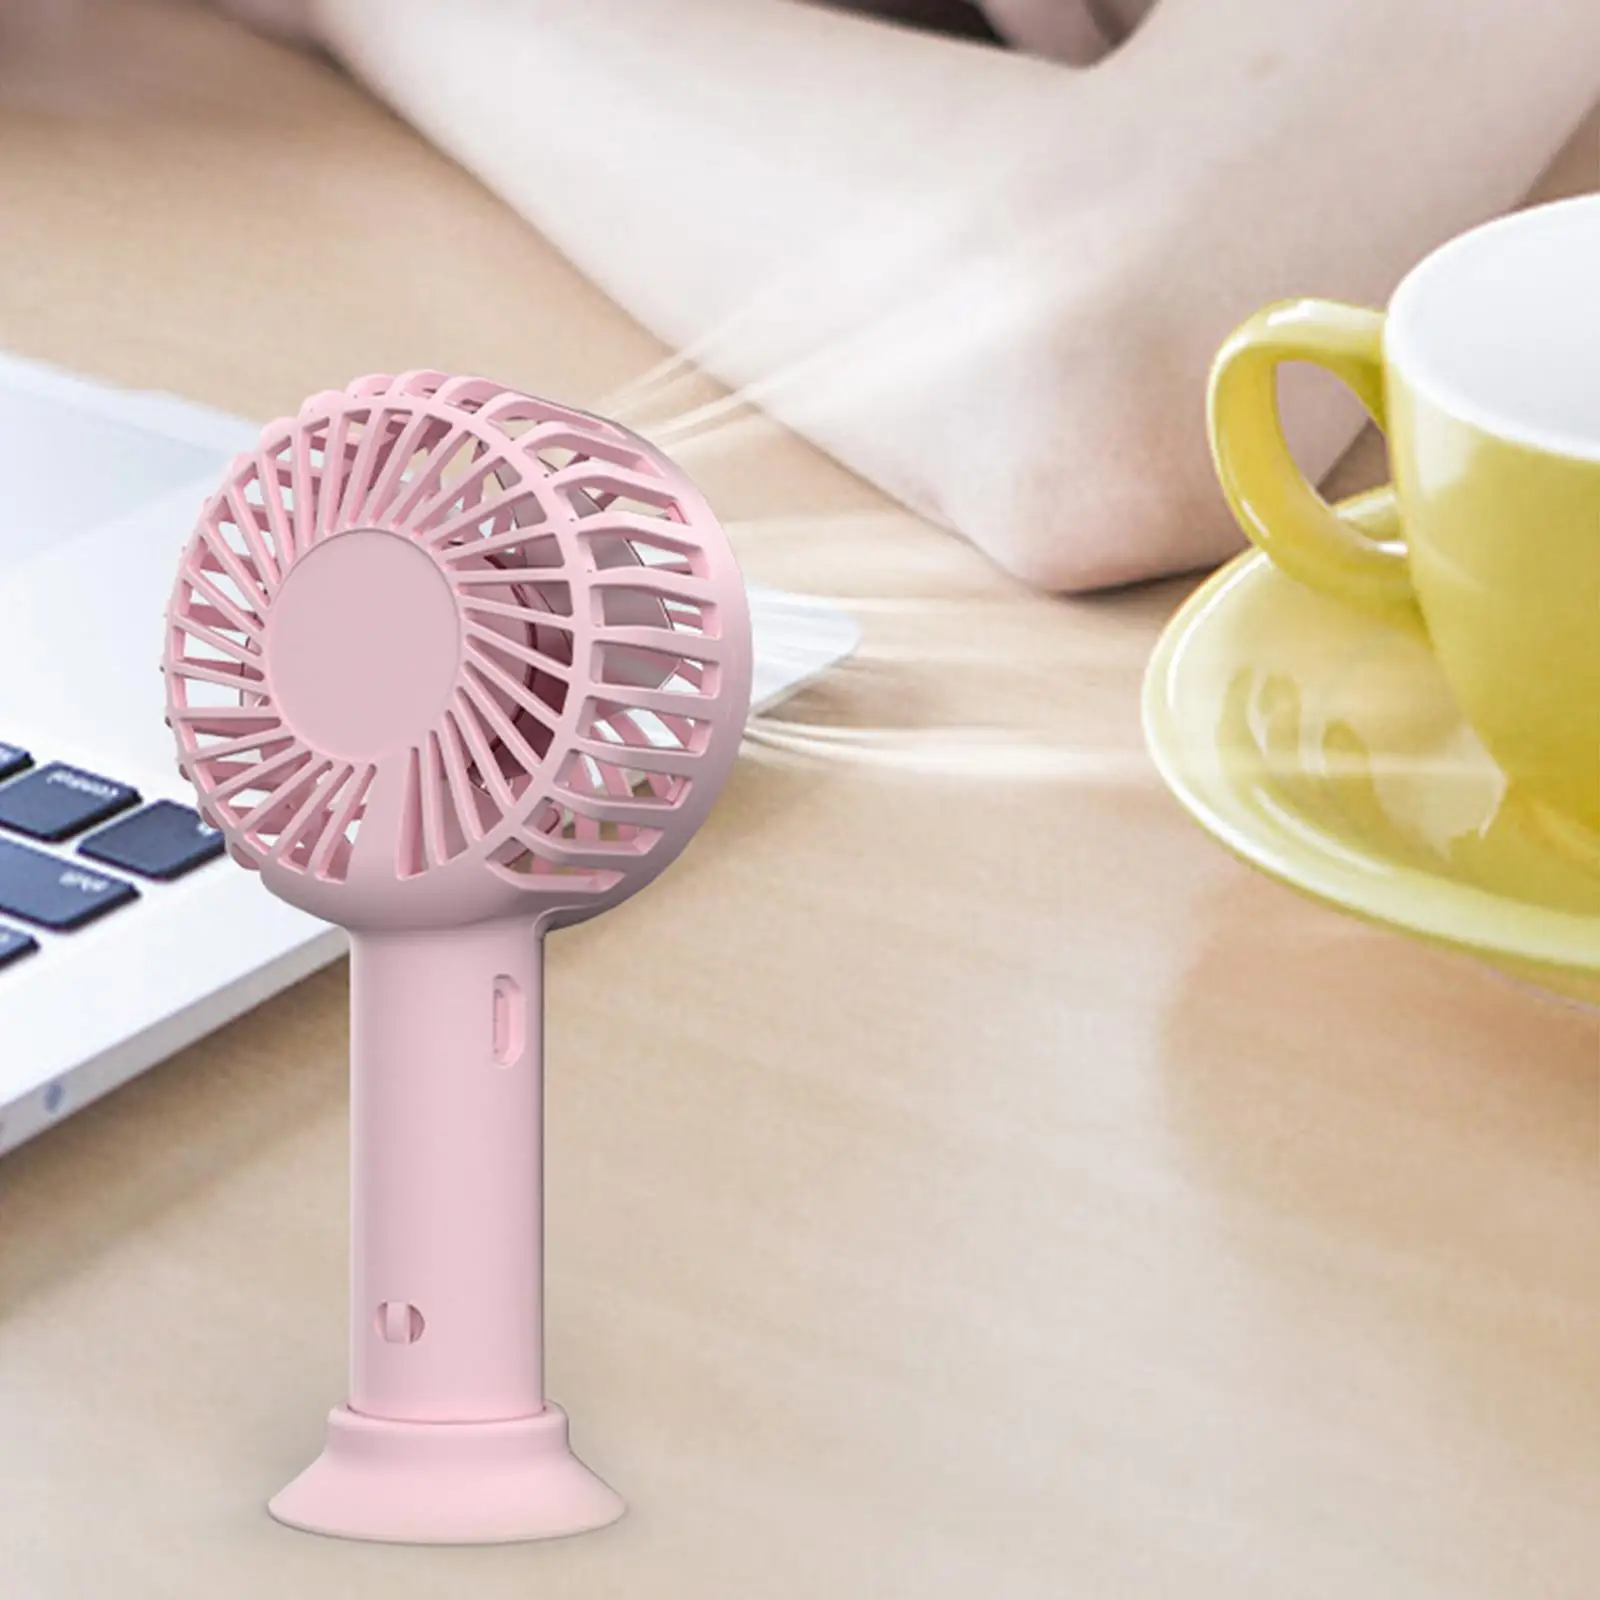 Portable Handheld Fan Personal Fan USB Rechargeable Mini Hand Fan with Base for Travel Home for Women Man Gift Lighting Effect